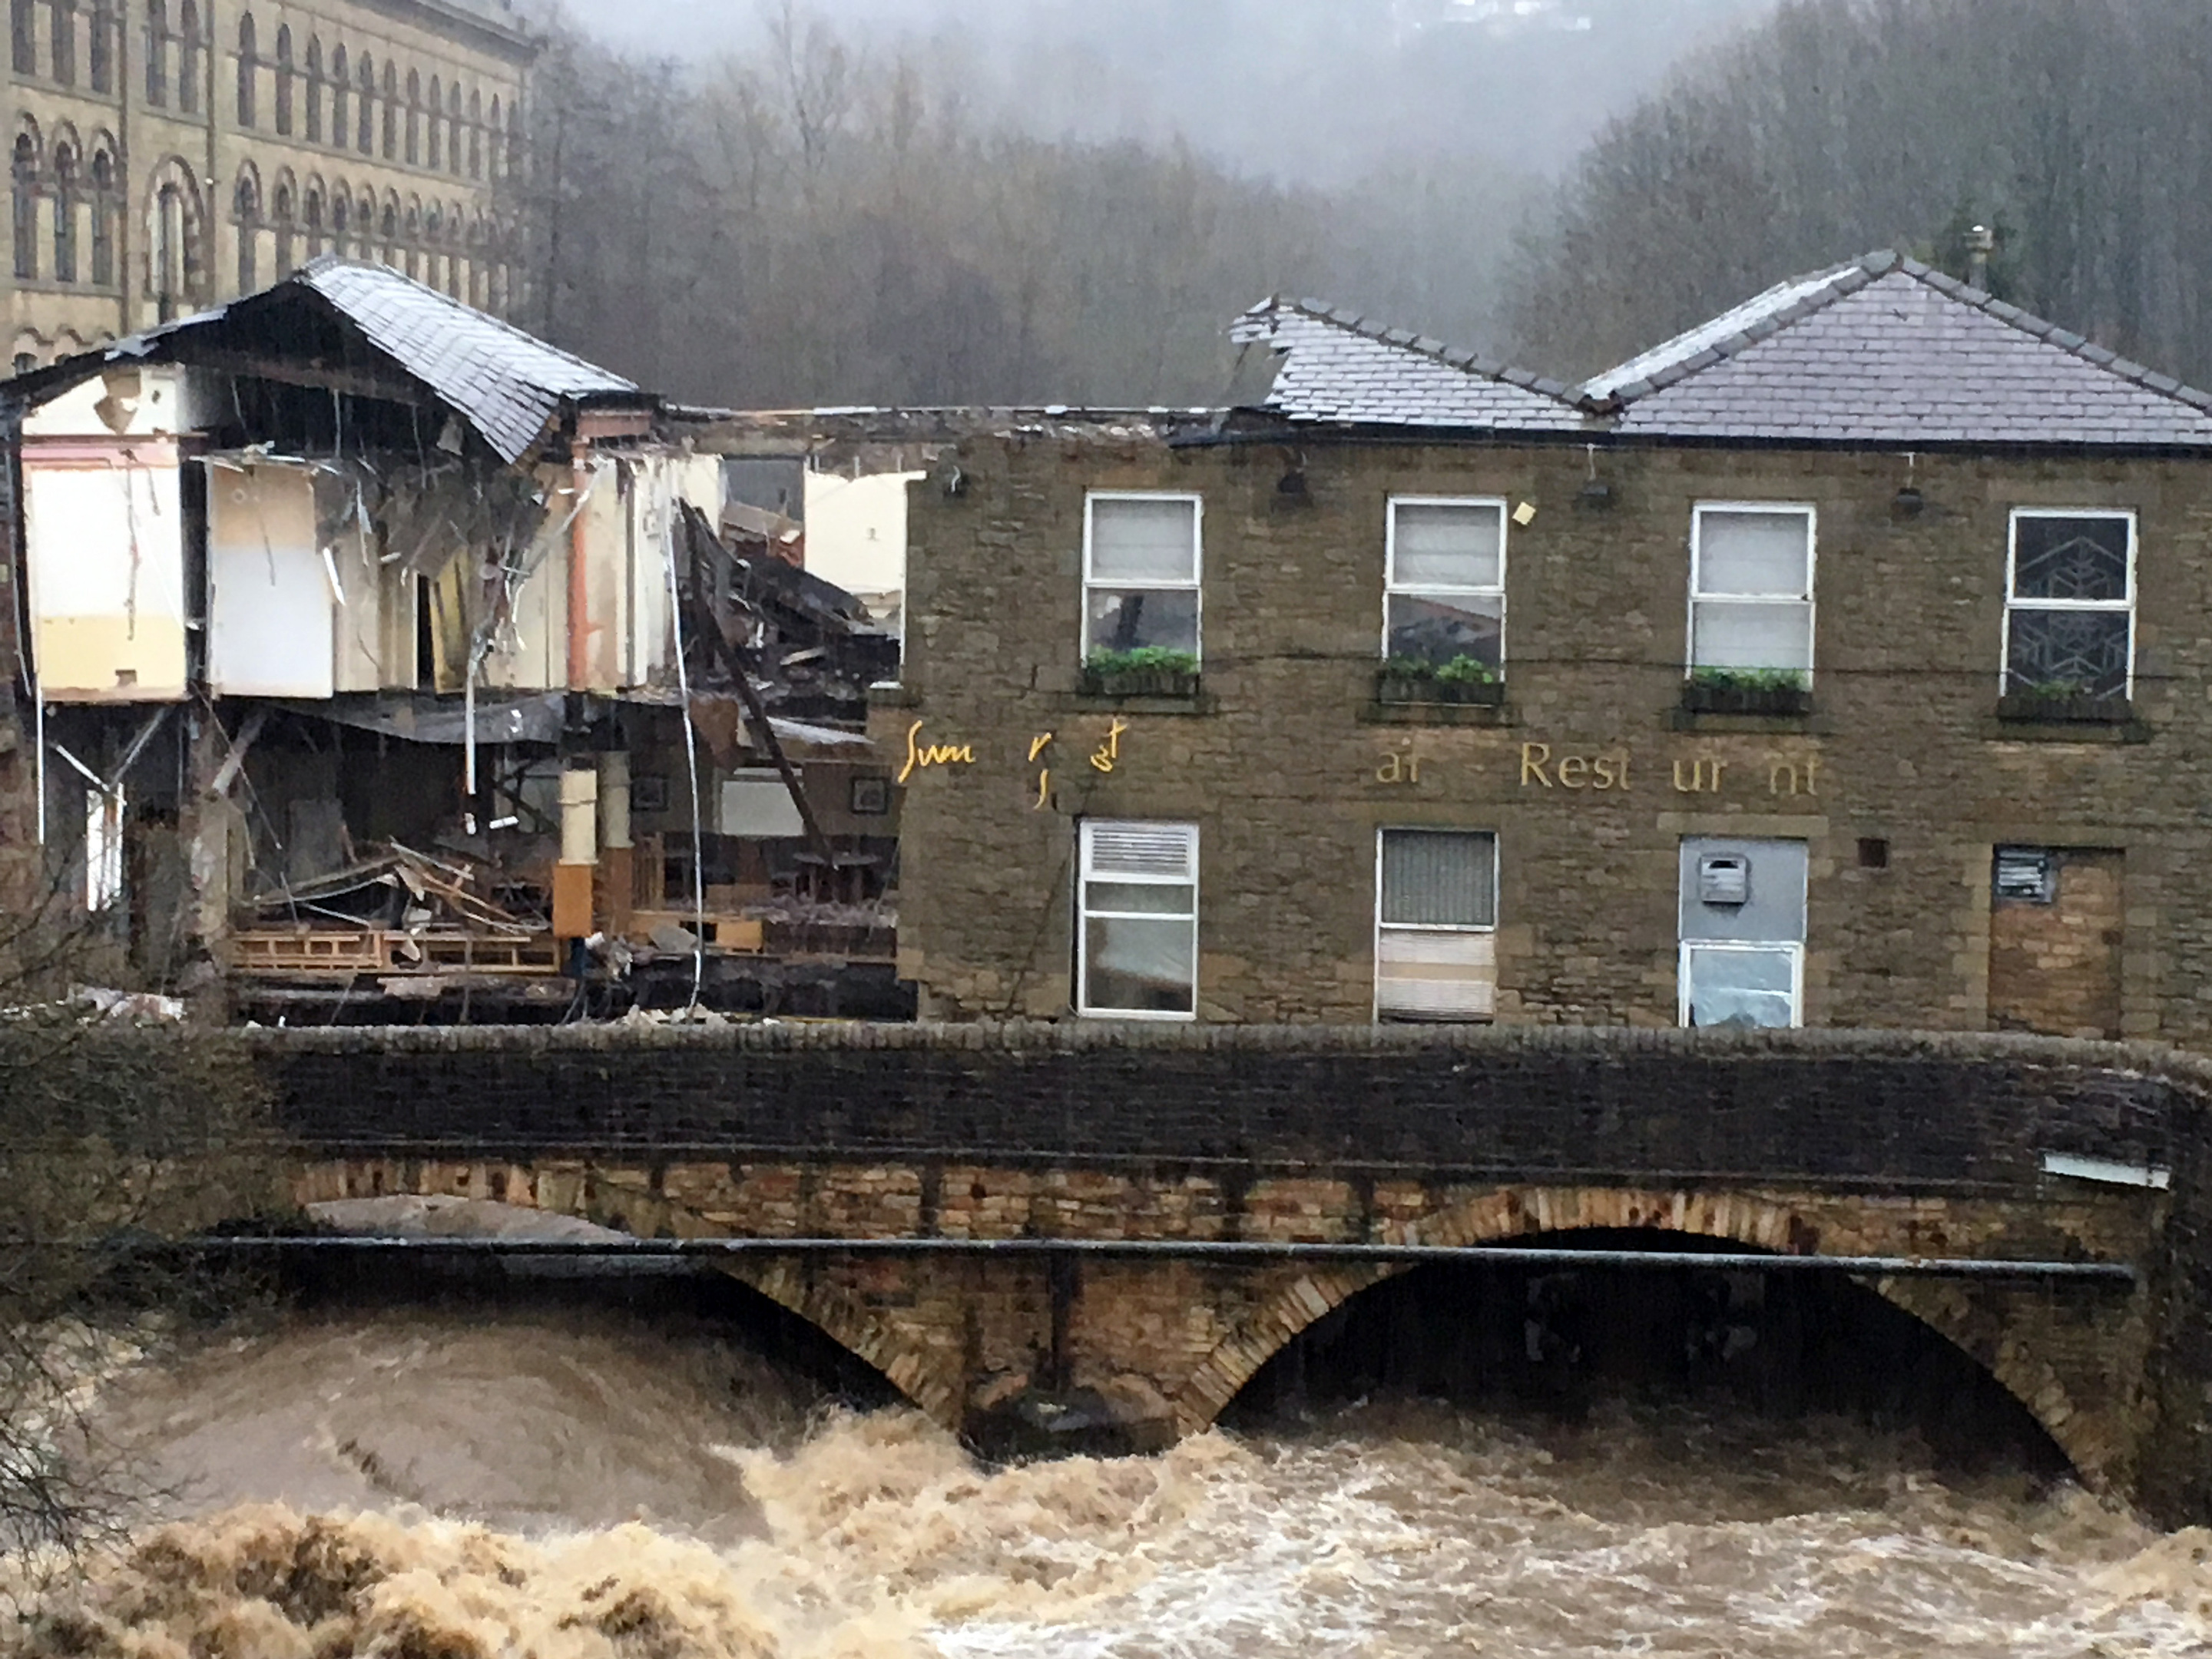 Waterside pub in Summerseat, Lancashire, which partially collapsed due to flooding in the River Irwell.  (Neil Hughes / PA Wire)